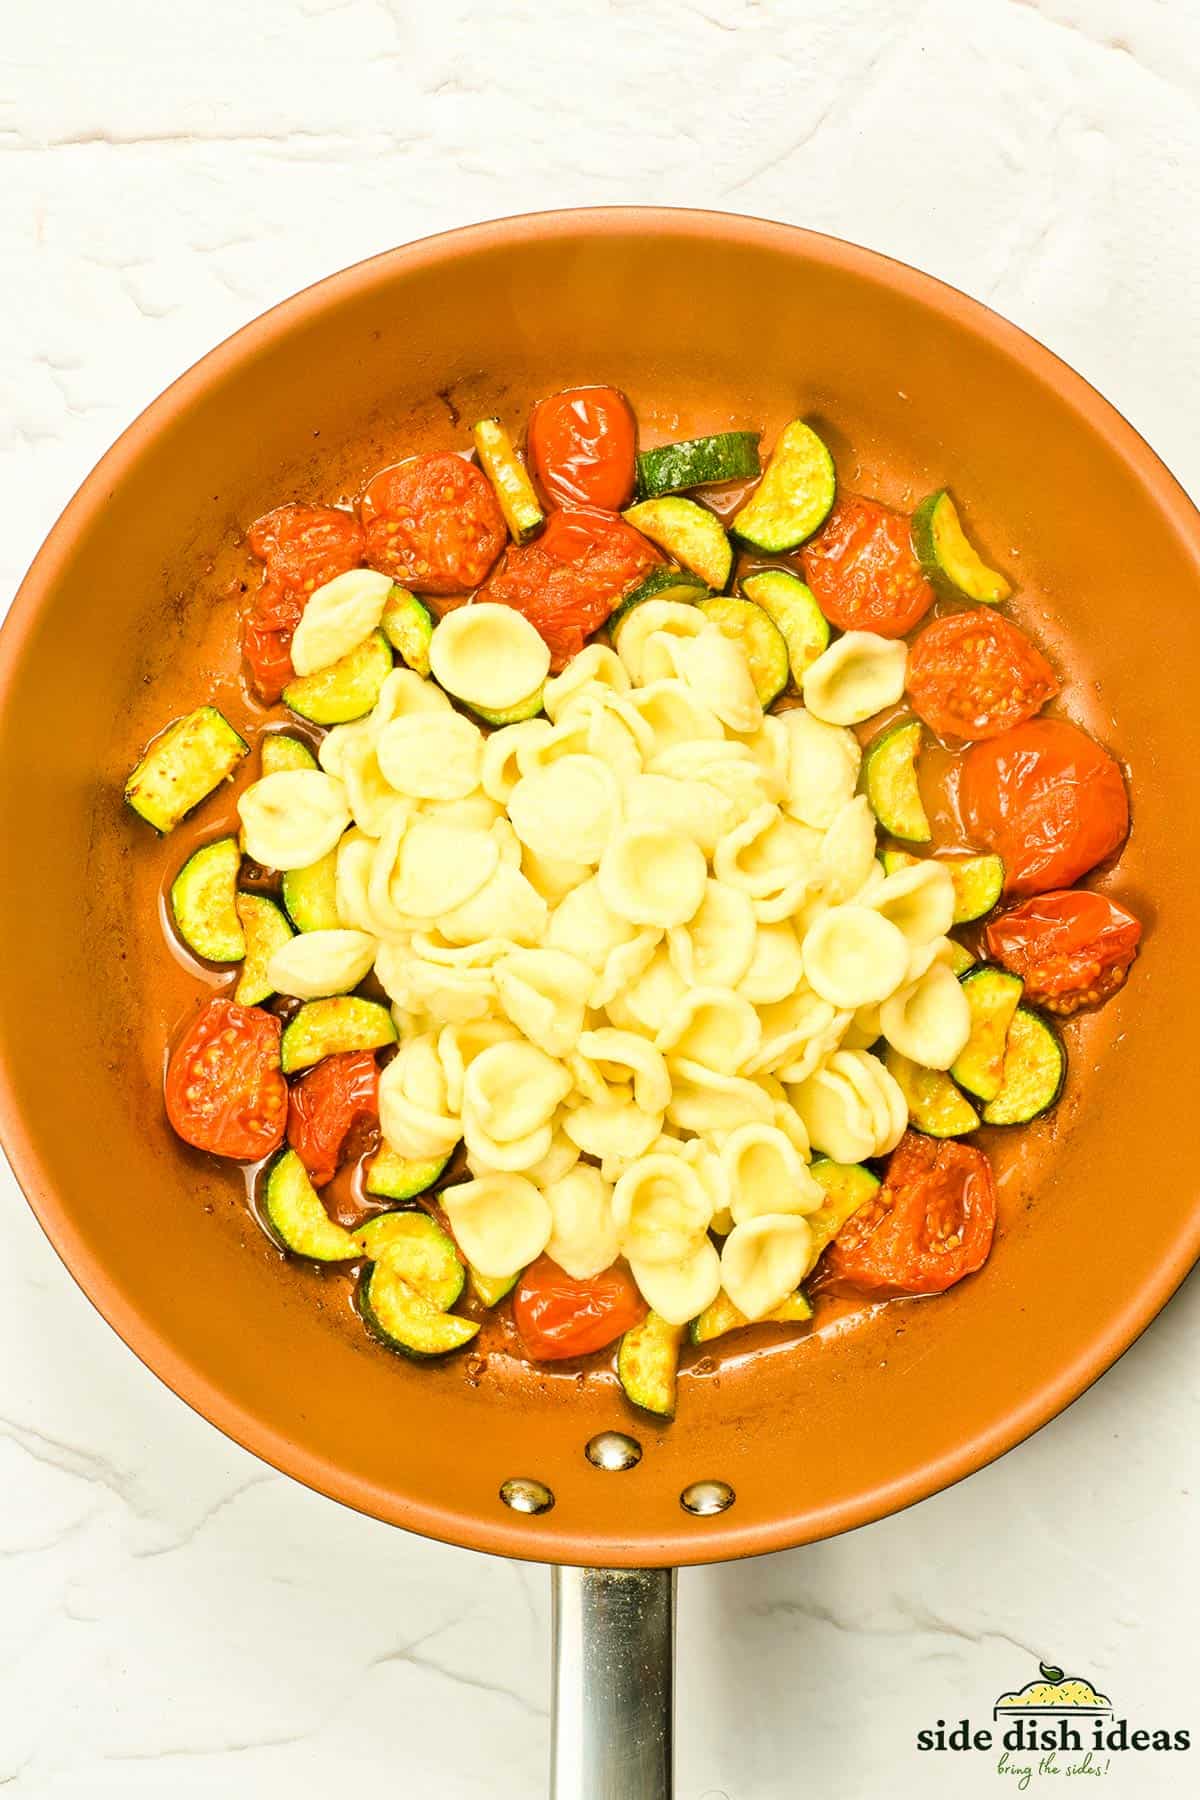 the pasta added to the pan of cooked vegetables